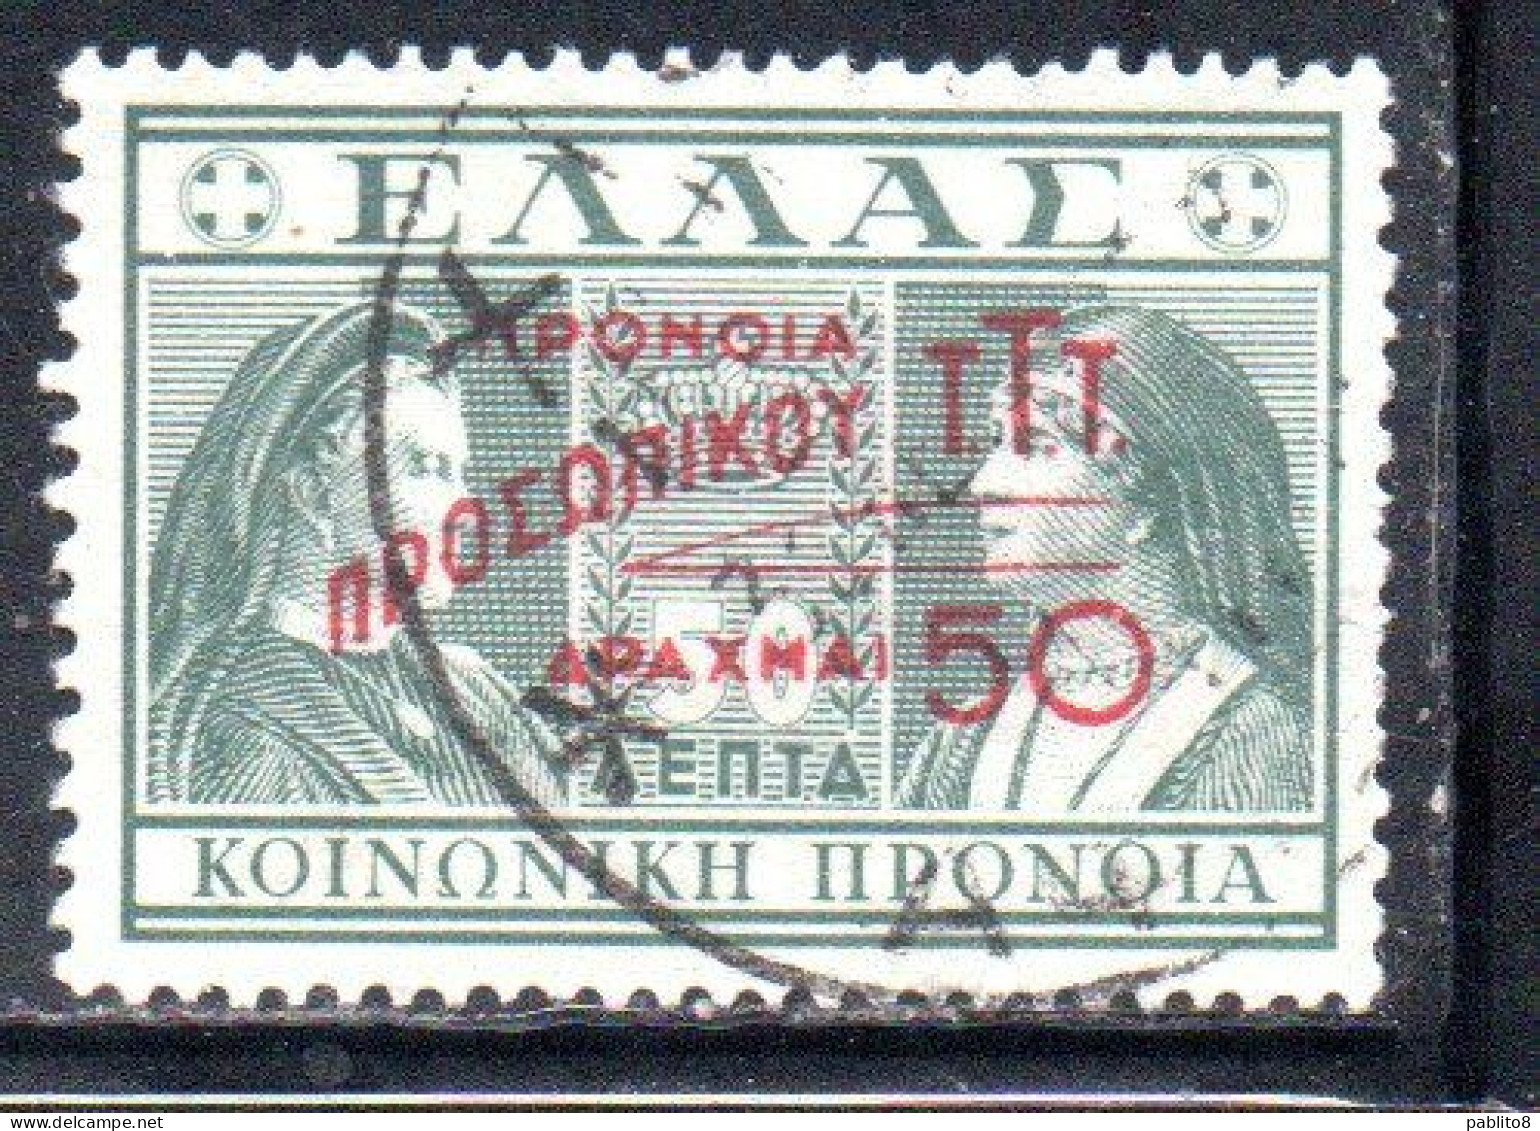 GREECE GRECIA ELLAS 1946 1947 POSTAL TAX STAMPS TUBERCULOSIS SURCHARGED 50d On 50l USED USATO OBLITERE' - Fiscali